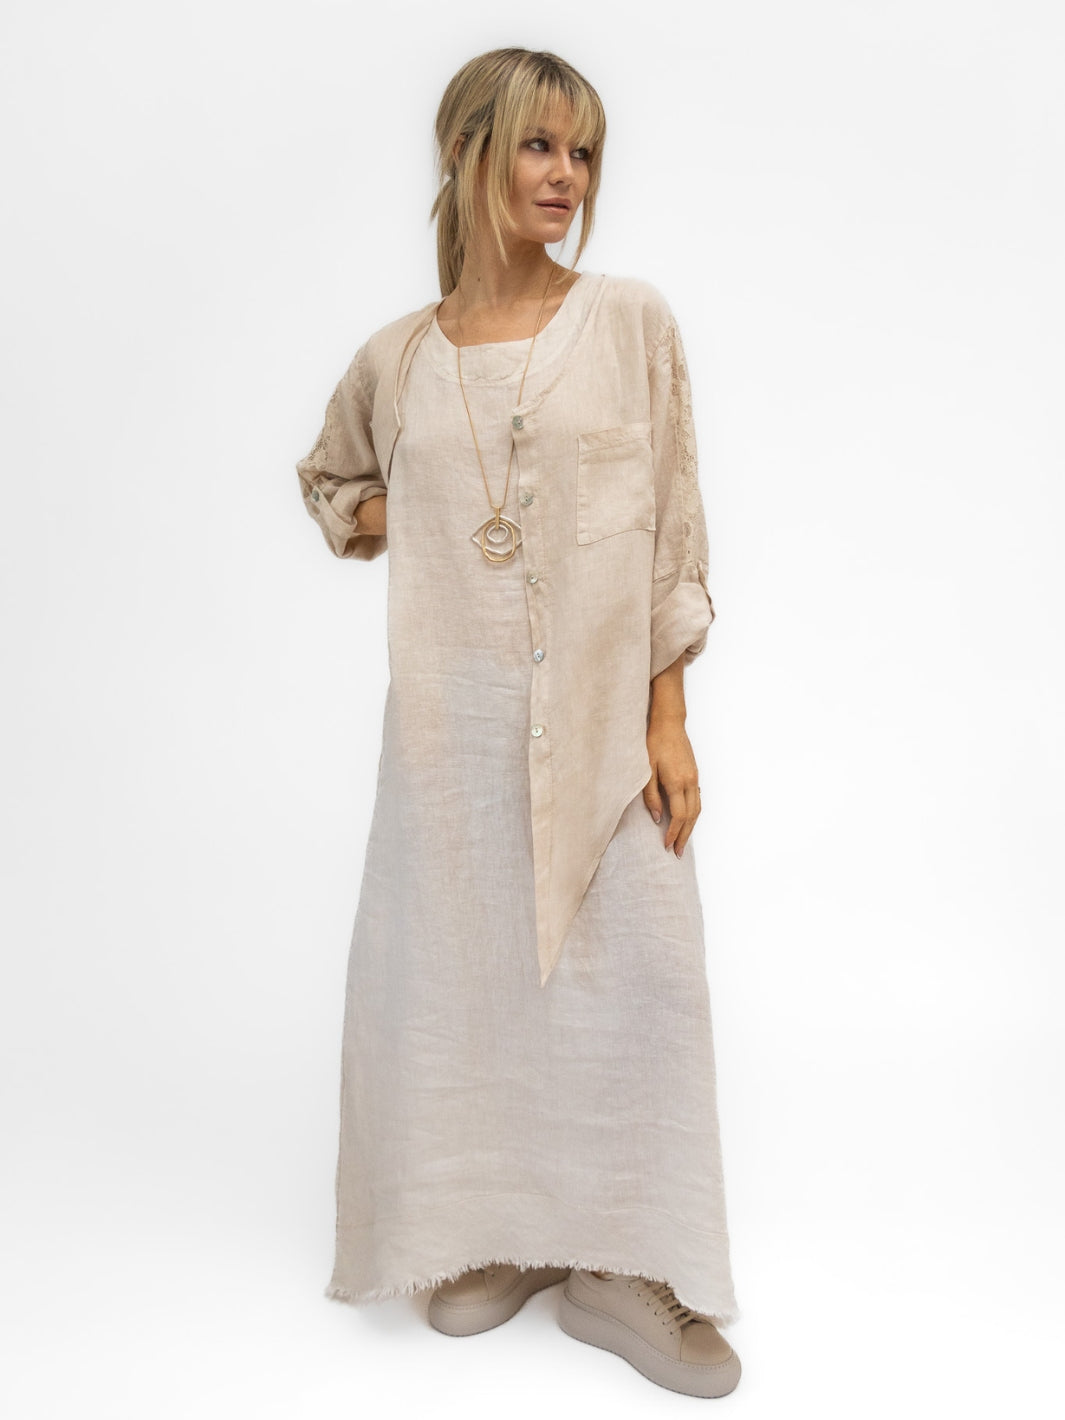 Diffusion by Kate Dress One Size Linen Dress in Sand